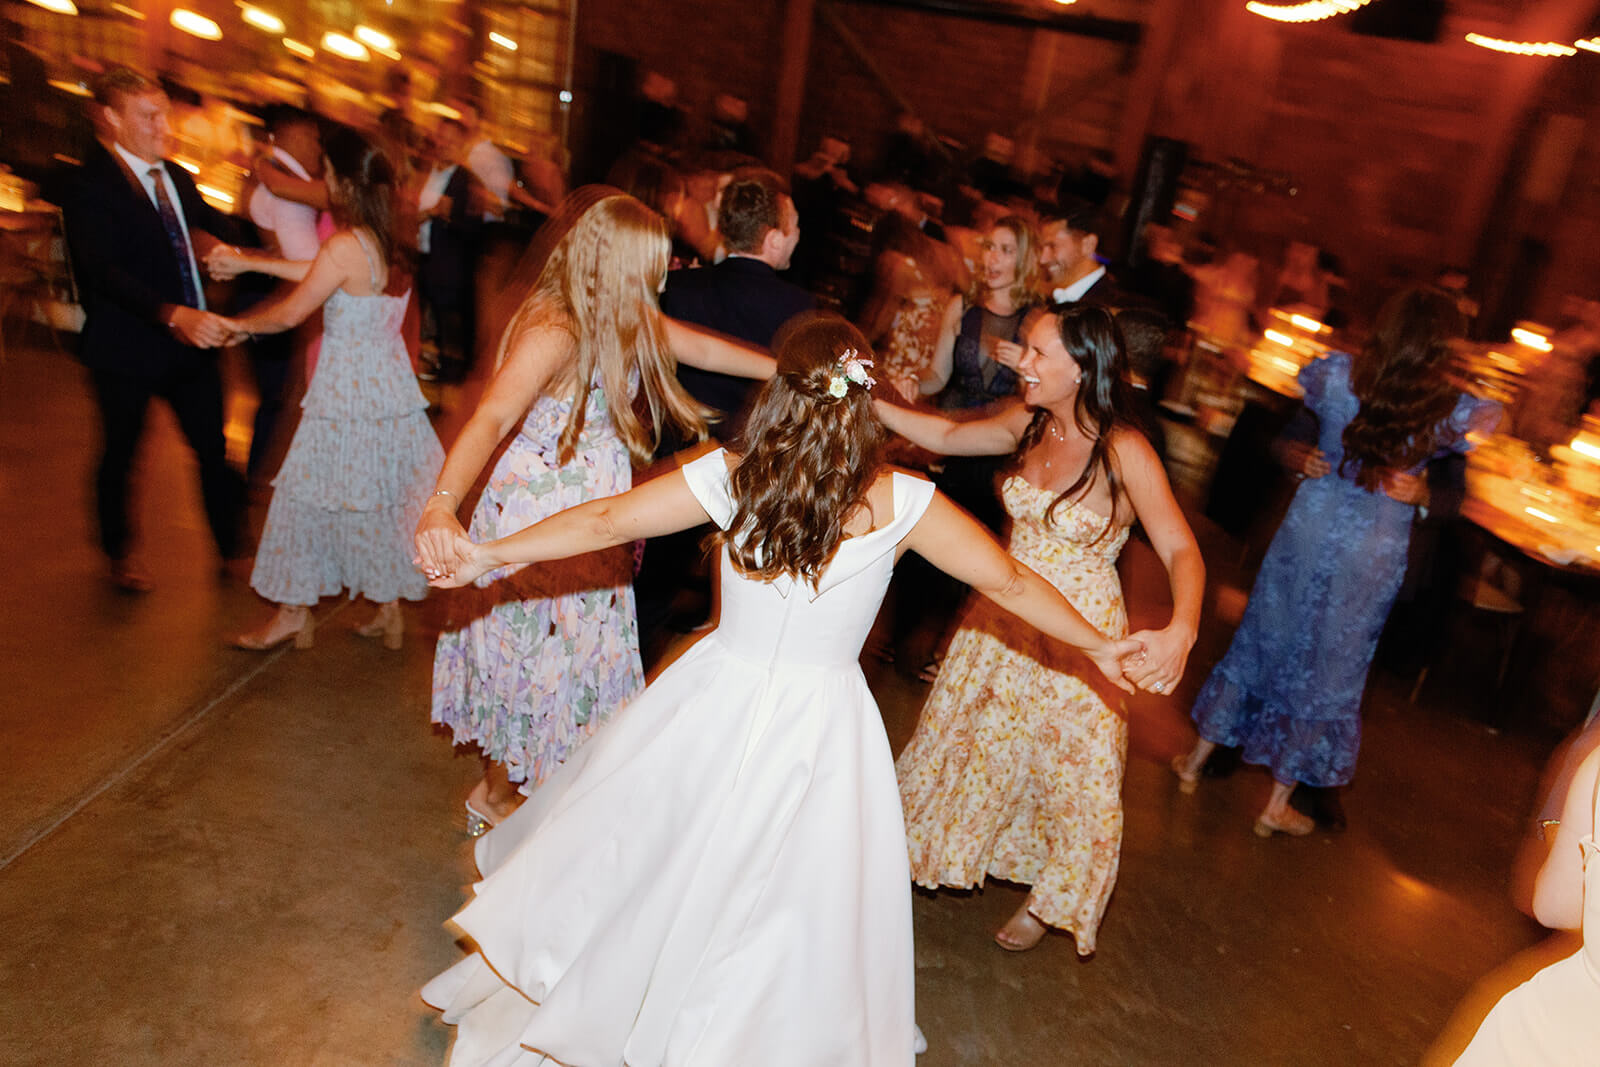 The bride holds hands with two friends as they dance